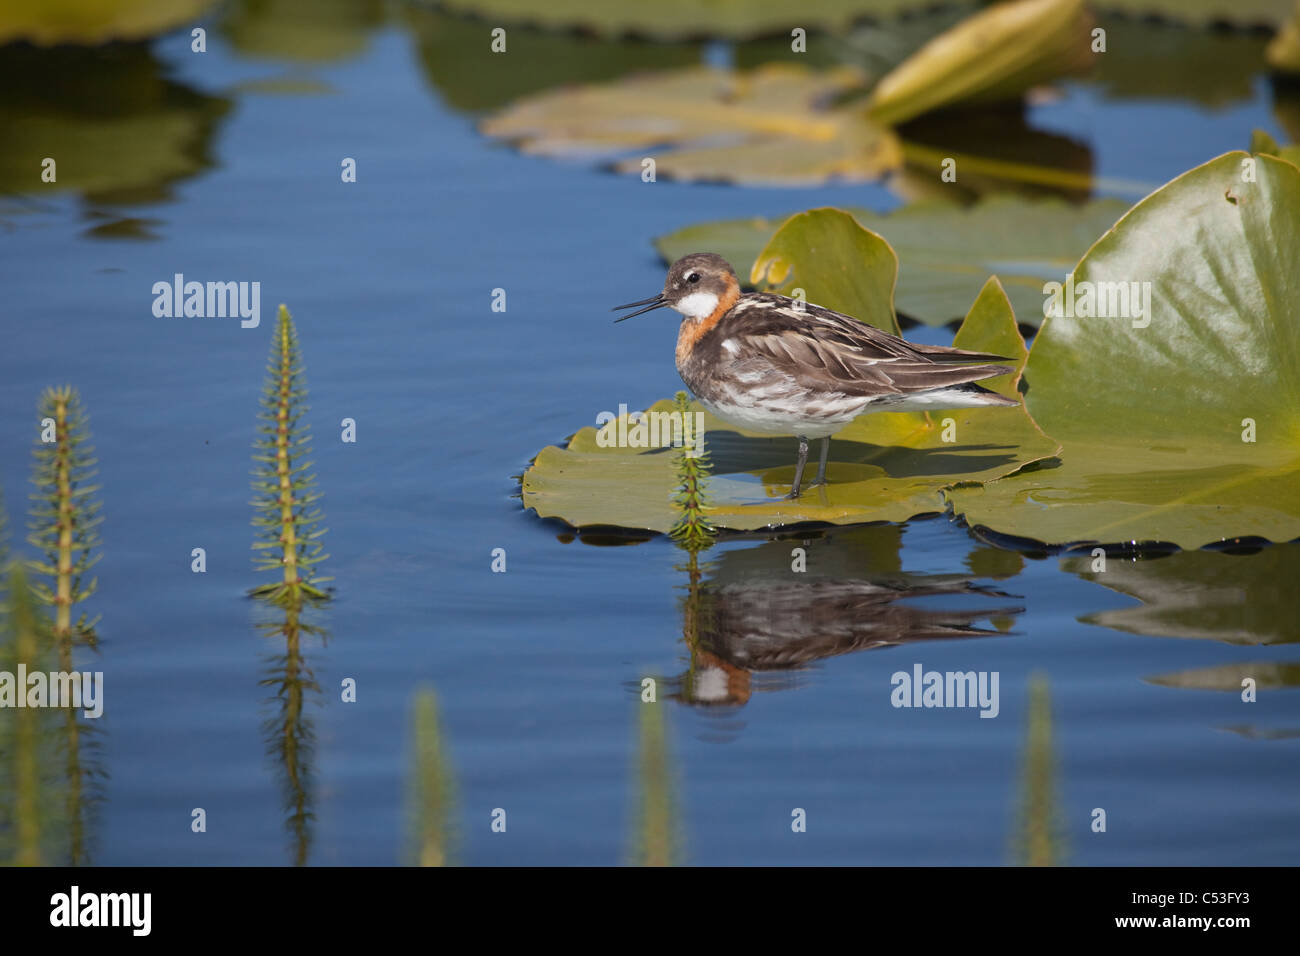 Red-necked Phalarope standing on a pond lily, Copper River Delta, Southcentral Alaska, Summer Stock Photo